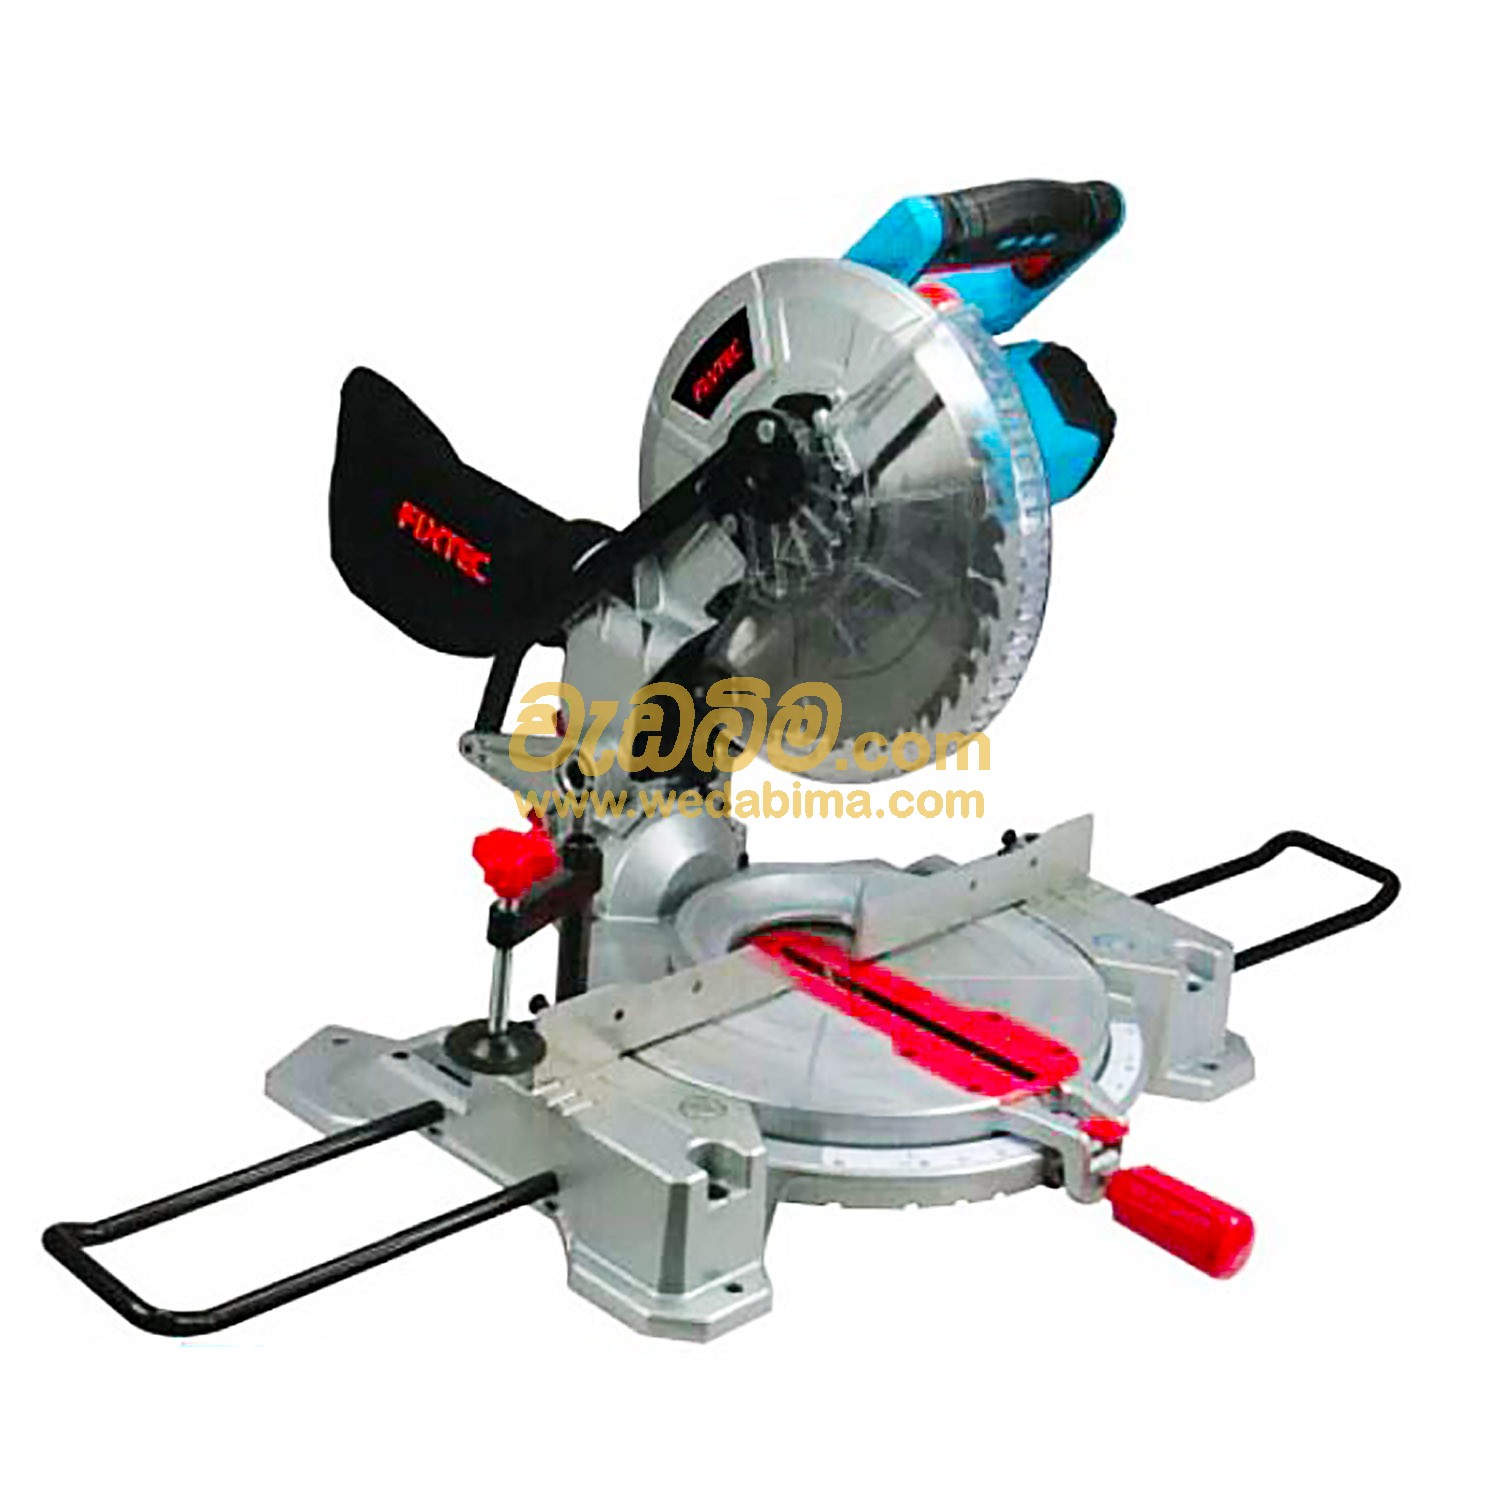 Cover image for 10 Inch Compound Miter Saw